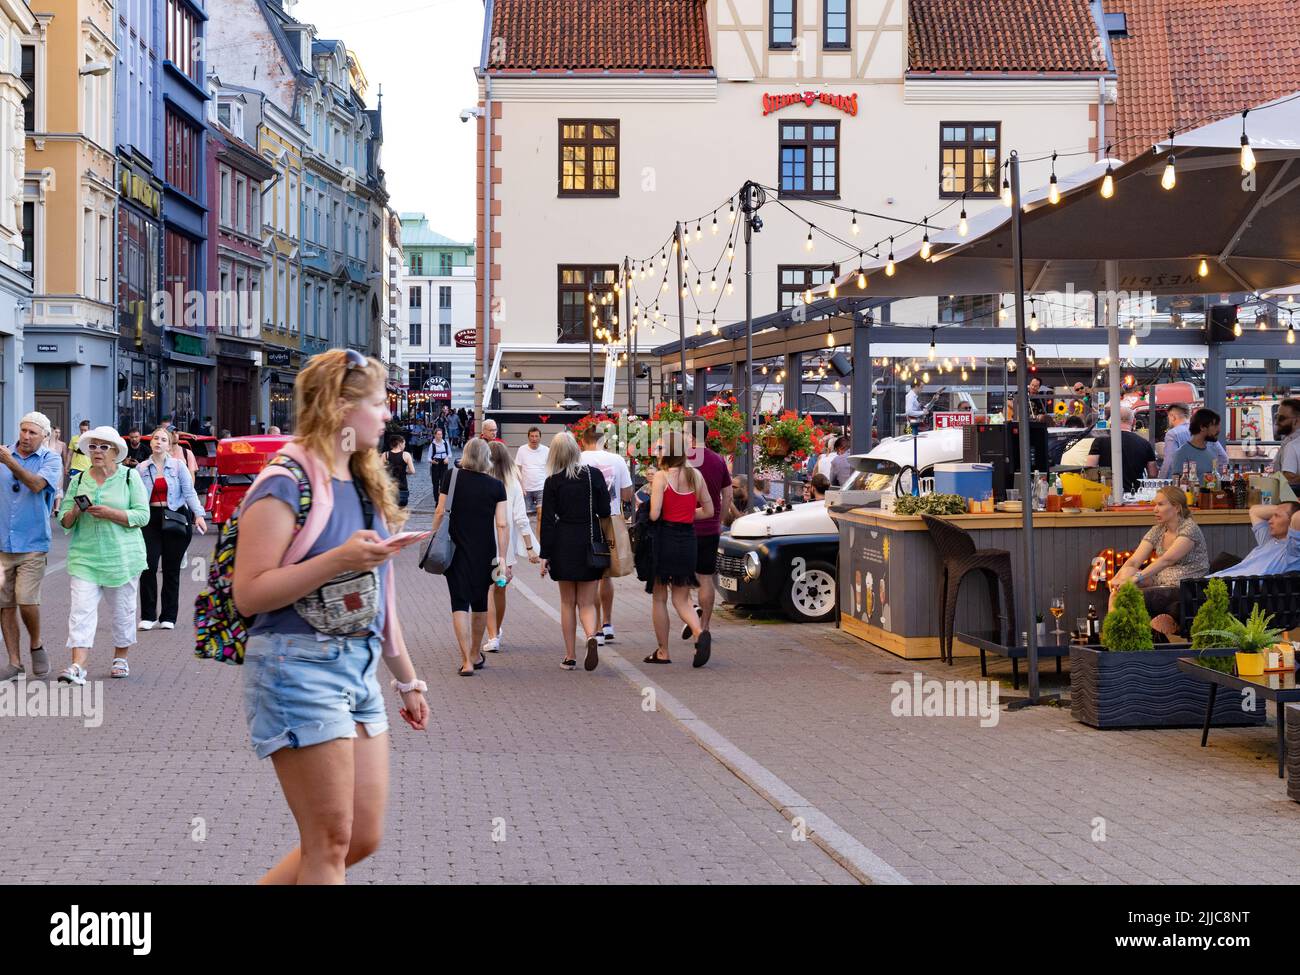 Riga street scene - tourists and crowd of local people mixing on a busy street in the evening as the bars opening, Riga Old Town, Riga Latvia Europe Stock Photo